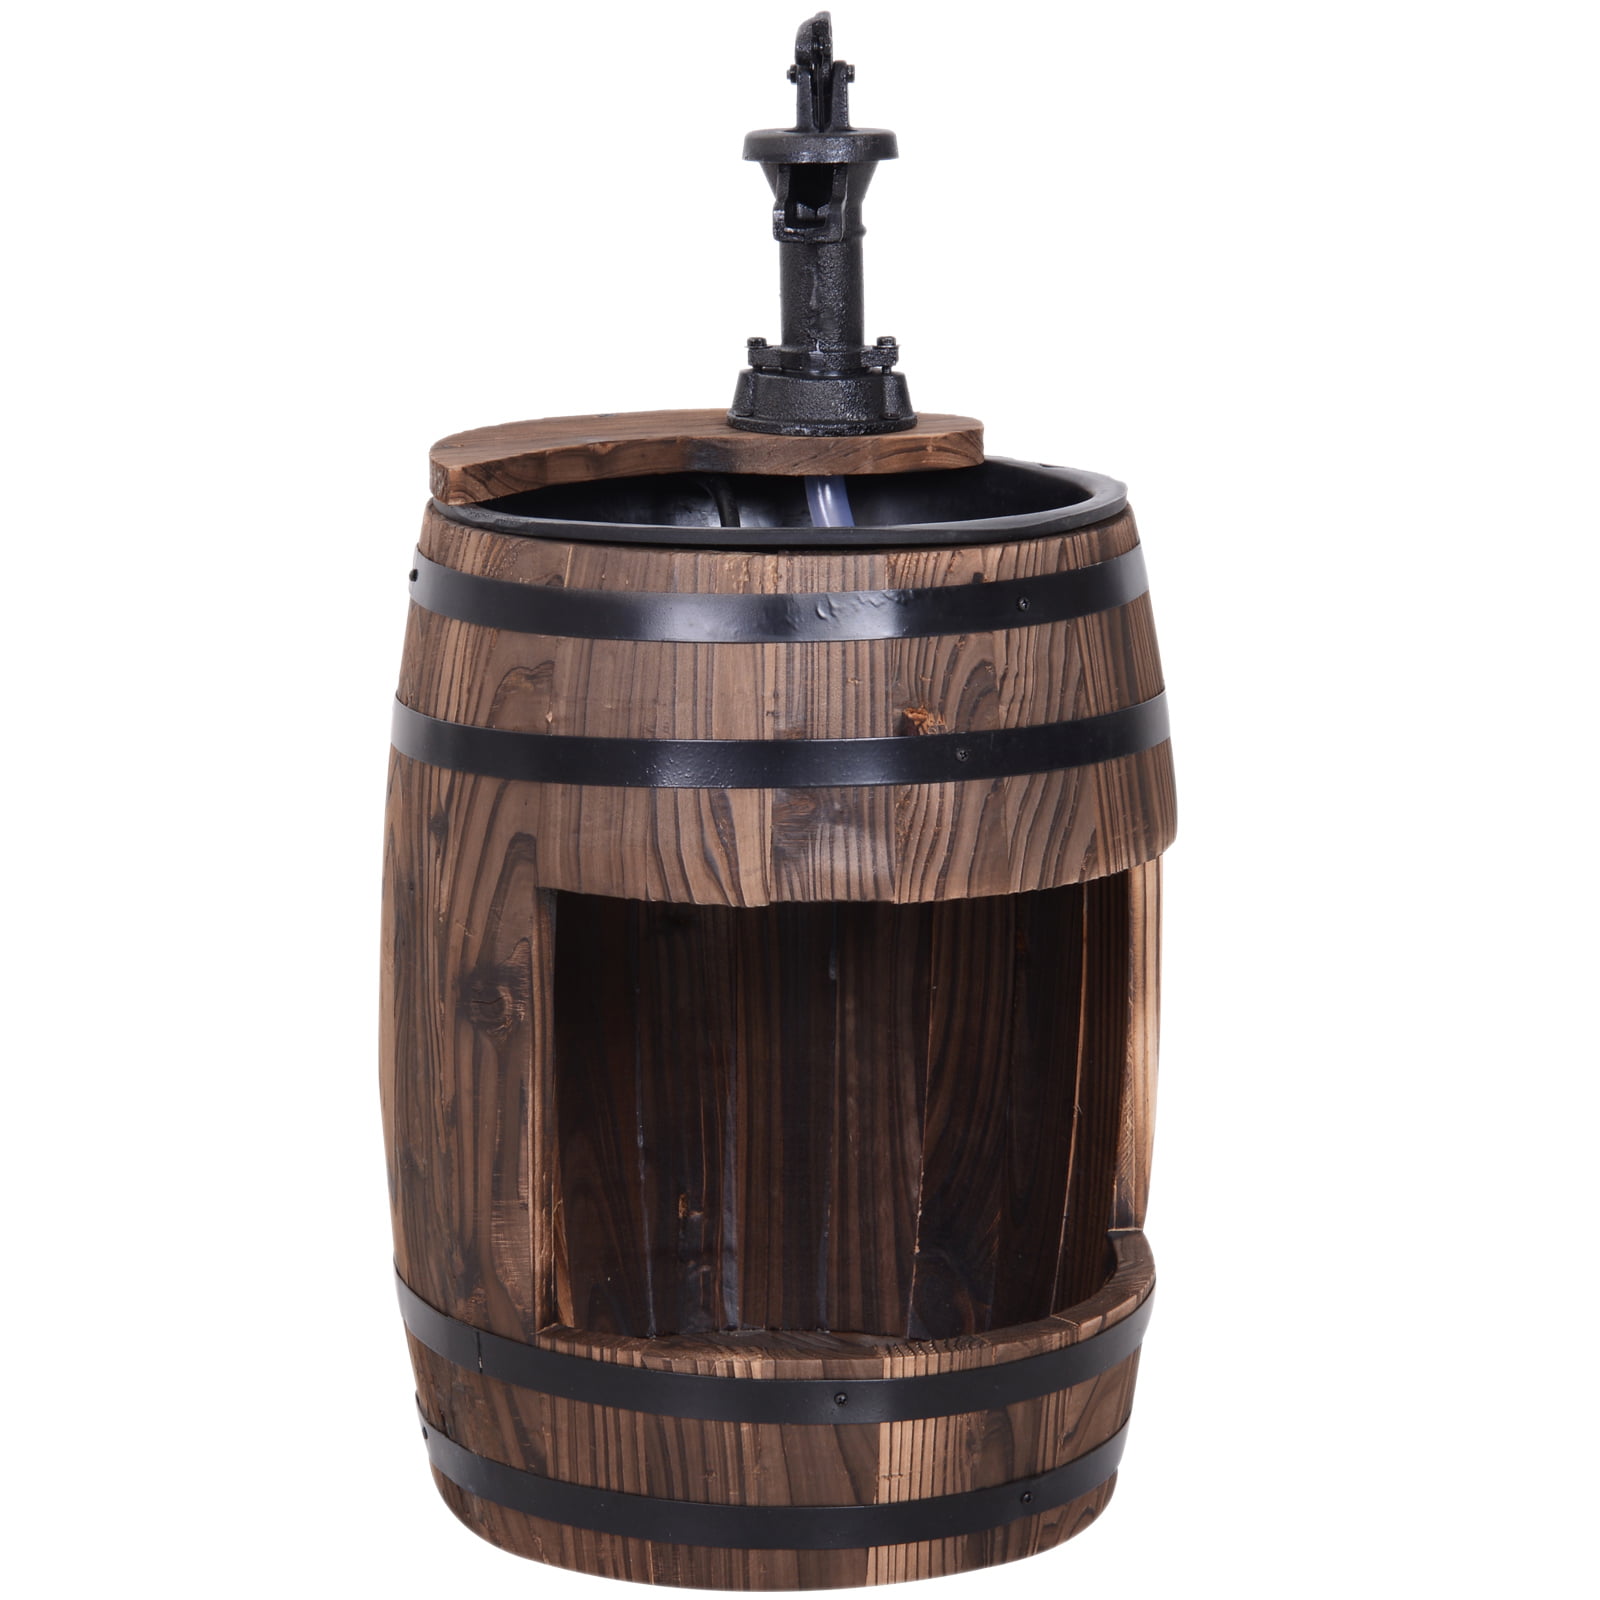 Type A Outsunny Wood Barrel Patio Water Fountain Garden Decorative Ornament Water Feature with Electric Pump